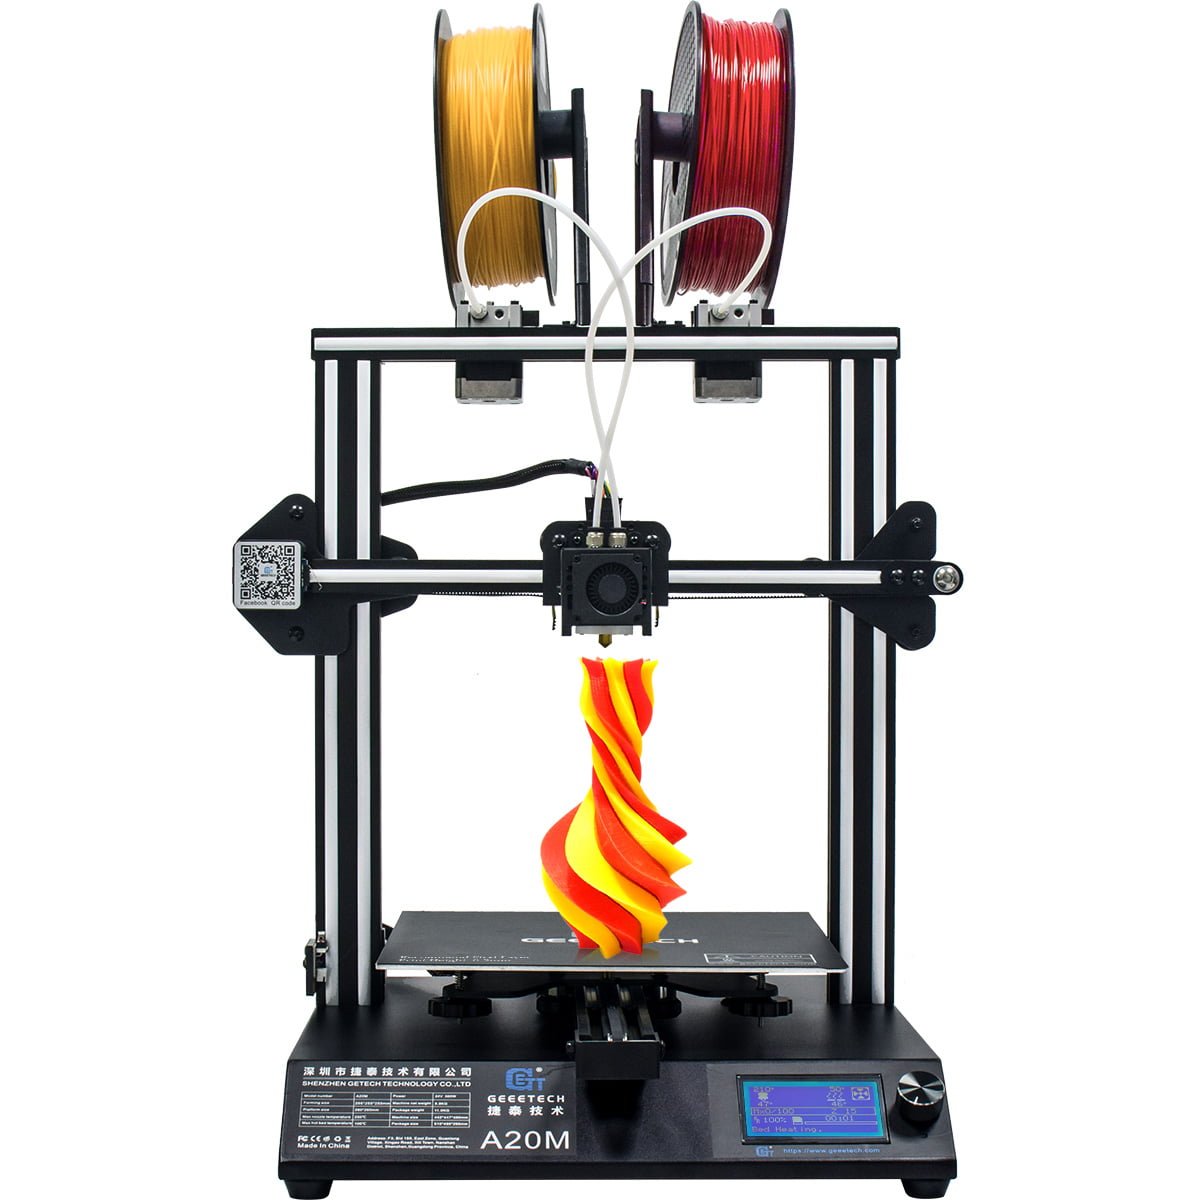 Geeetech A20M 3D Printer 2 in 1 out Dual Extruder Mix-Color Printing ... - 268bDb09 4263 450c A8b7 392b99cDaa5b 1.5a08b1ecf086b0a9709af809D1658f4f